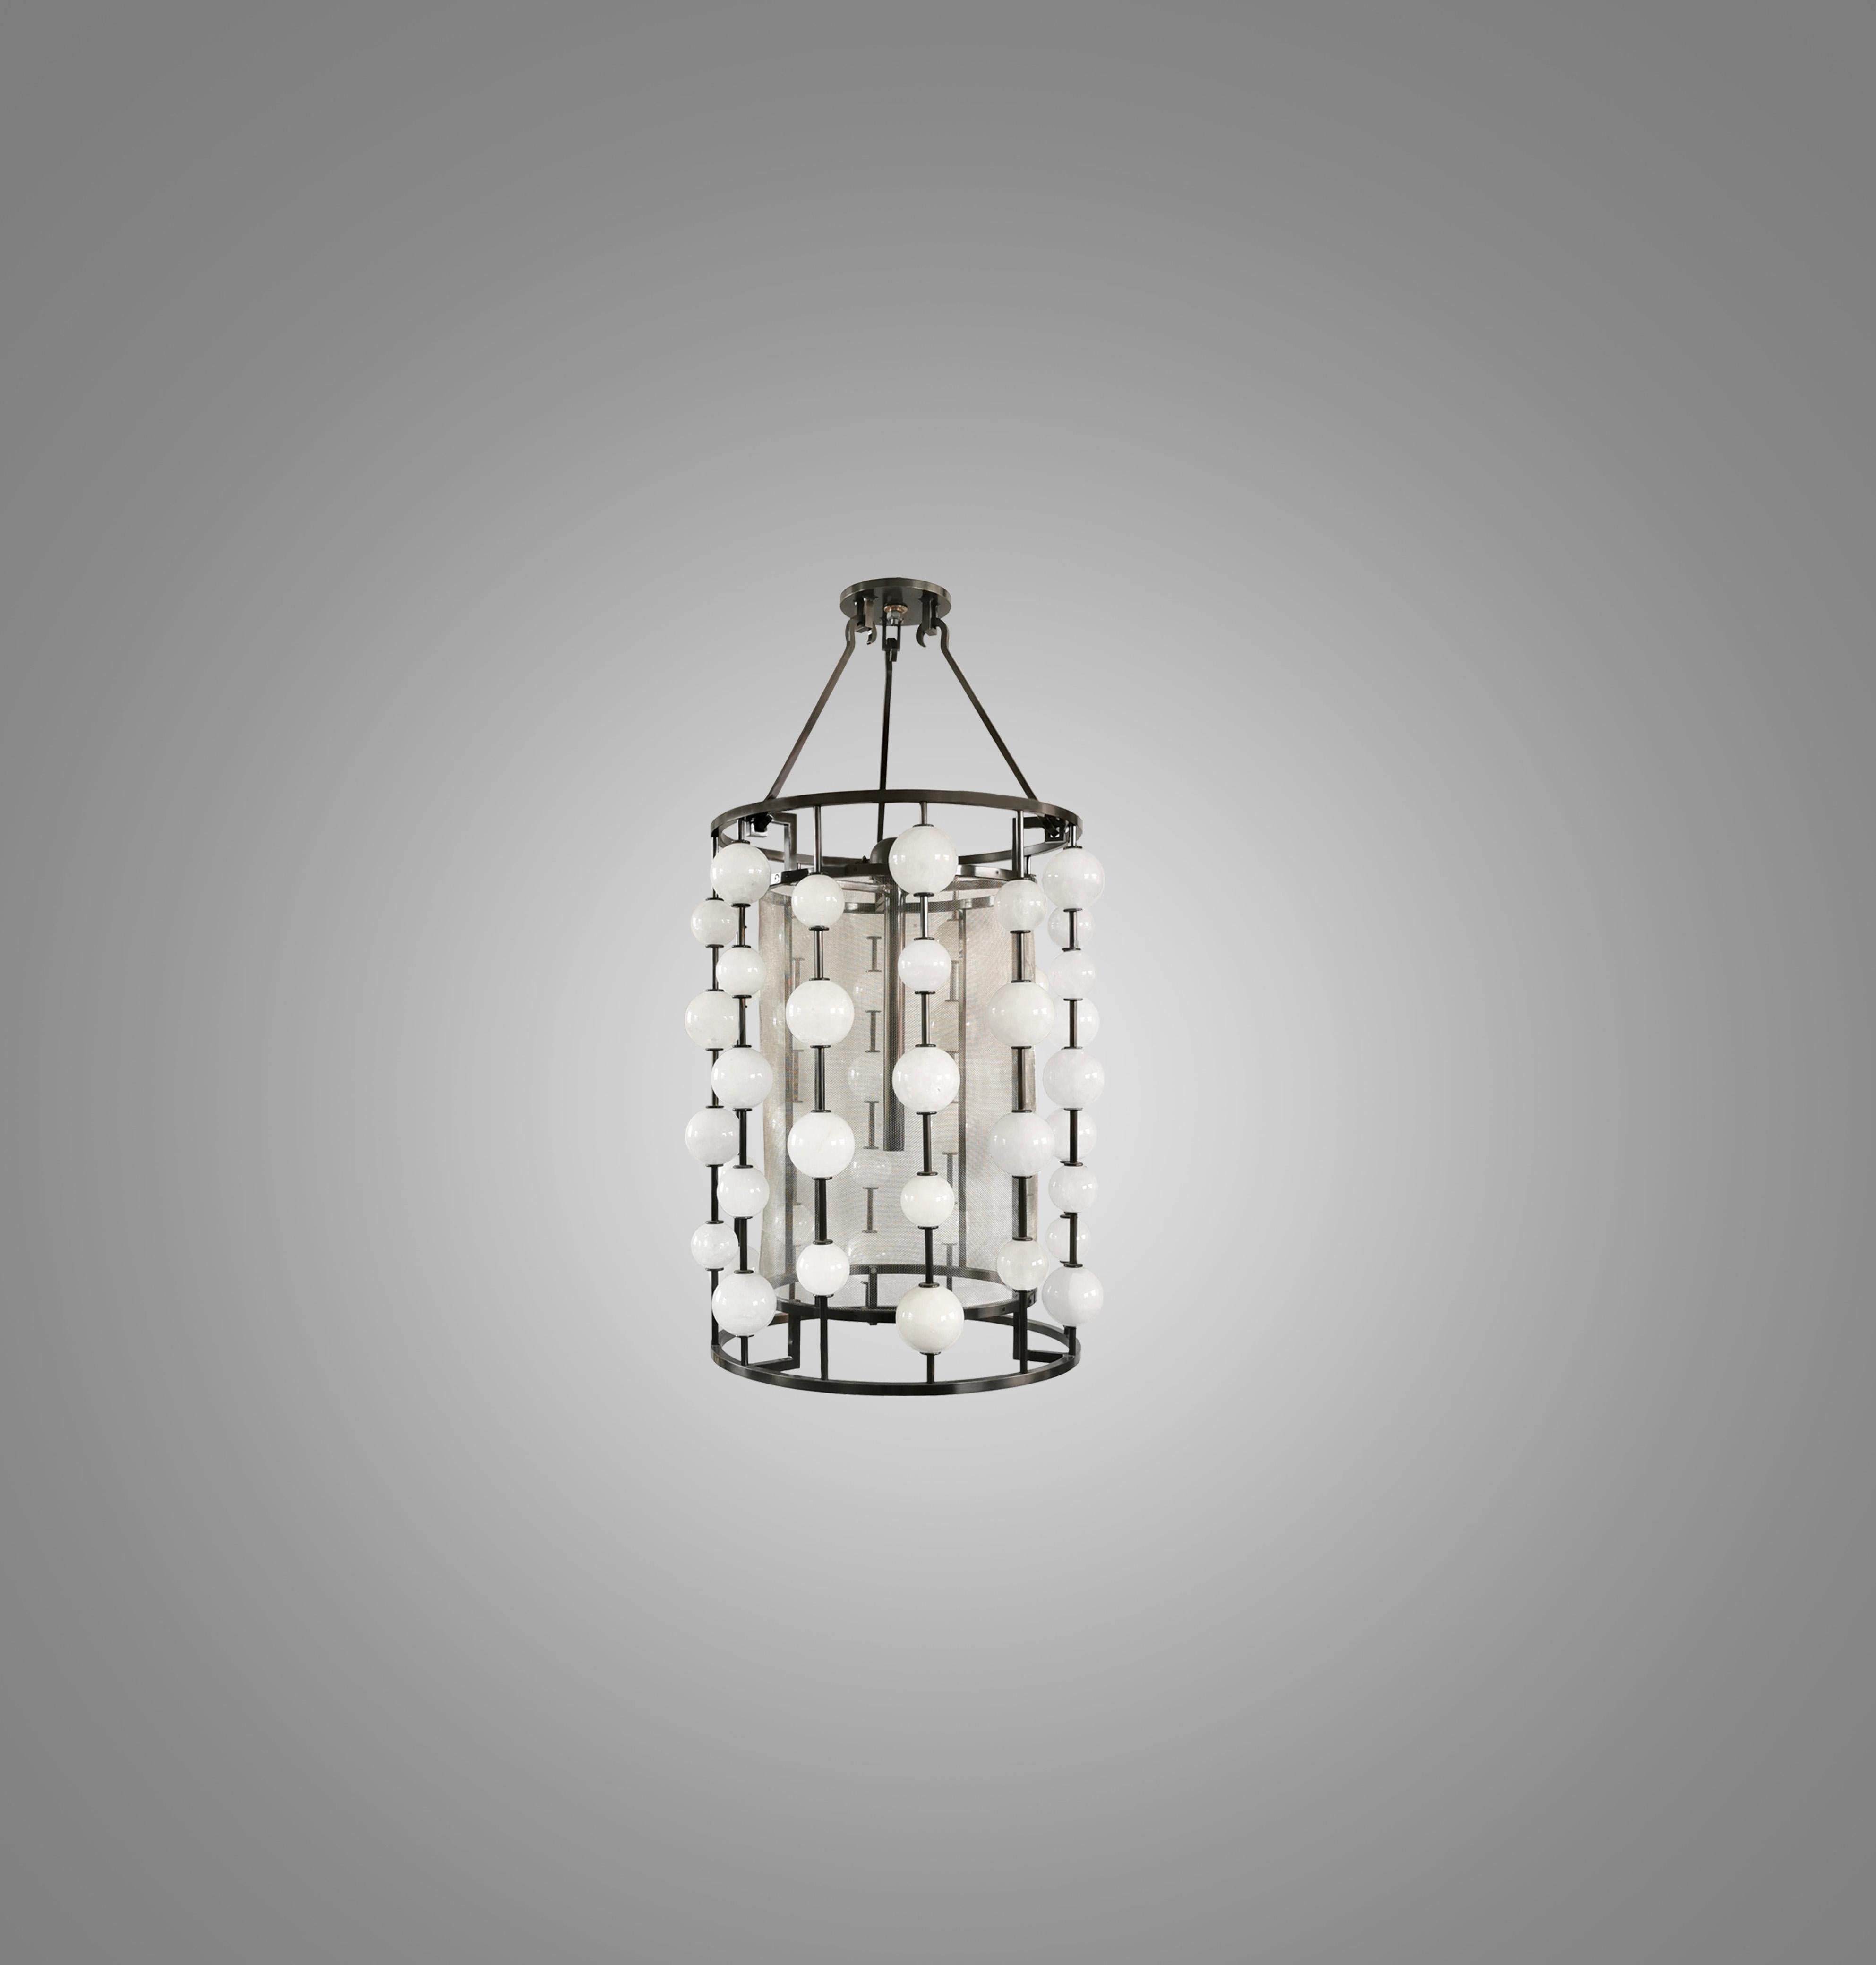 Rock crystal bubble pendant light with antique brass frame. Created by Phoenix Gallery, NYC.
Two sockets installed. E26 base light bulbs. 80w long tube lightbulb. 160w total. 
Height can be adjustable.
  